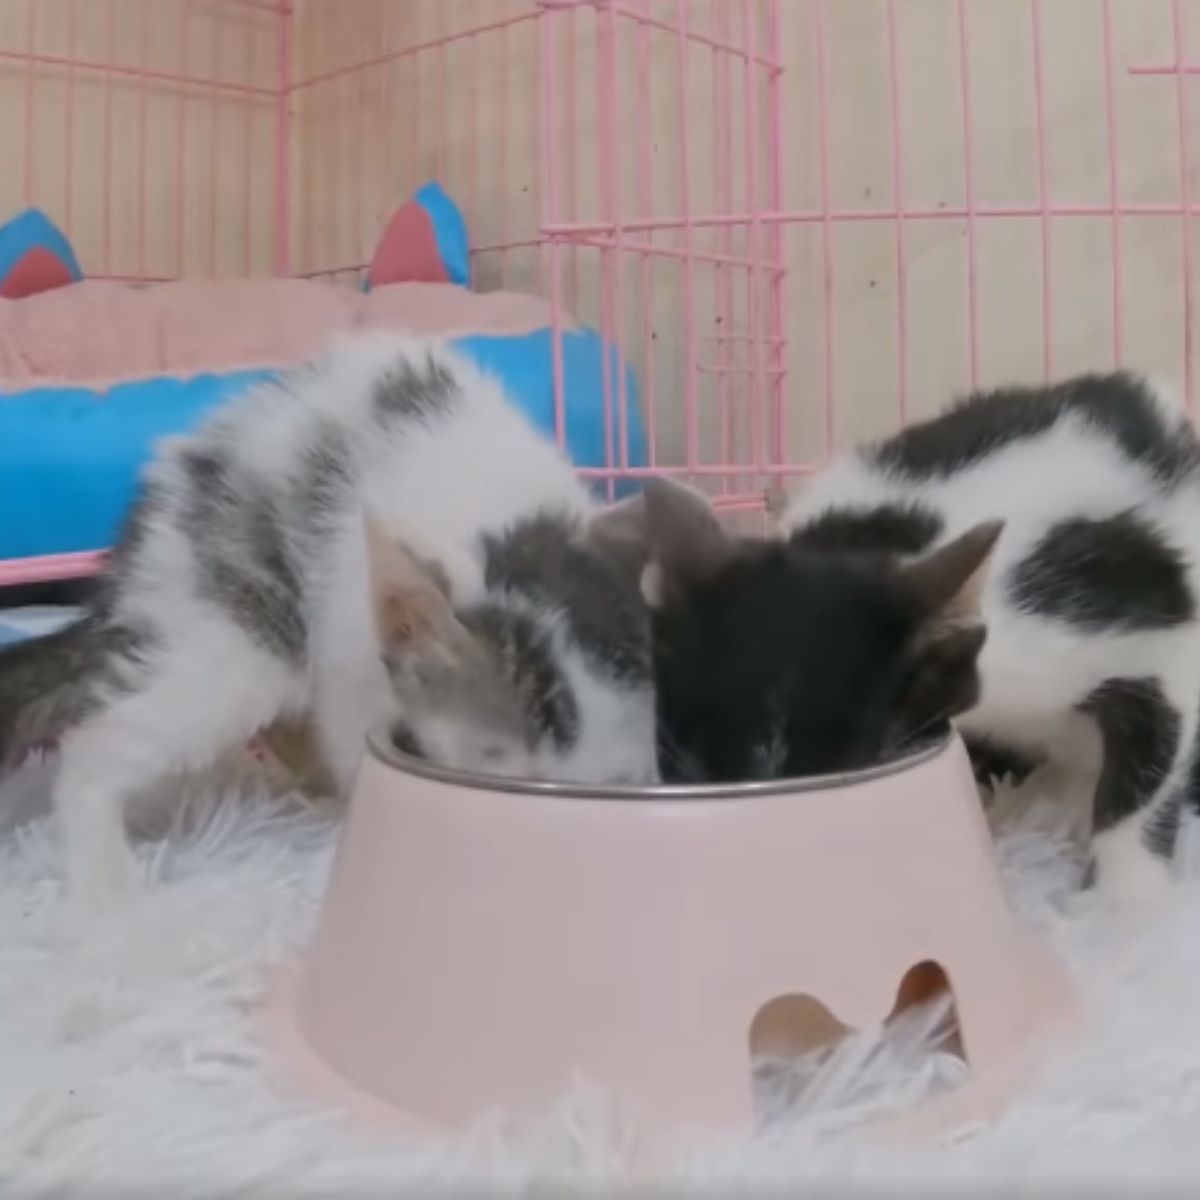 kittens eating from a pink bowl